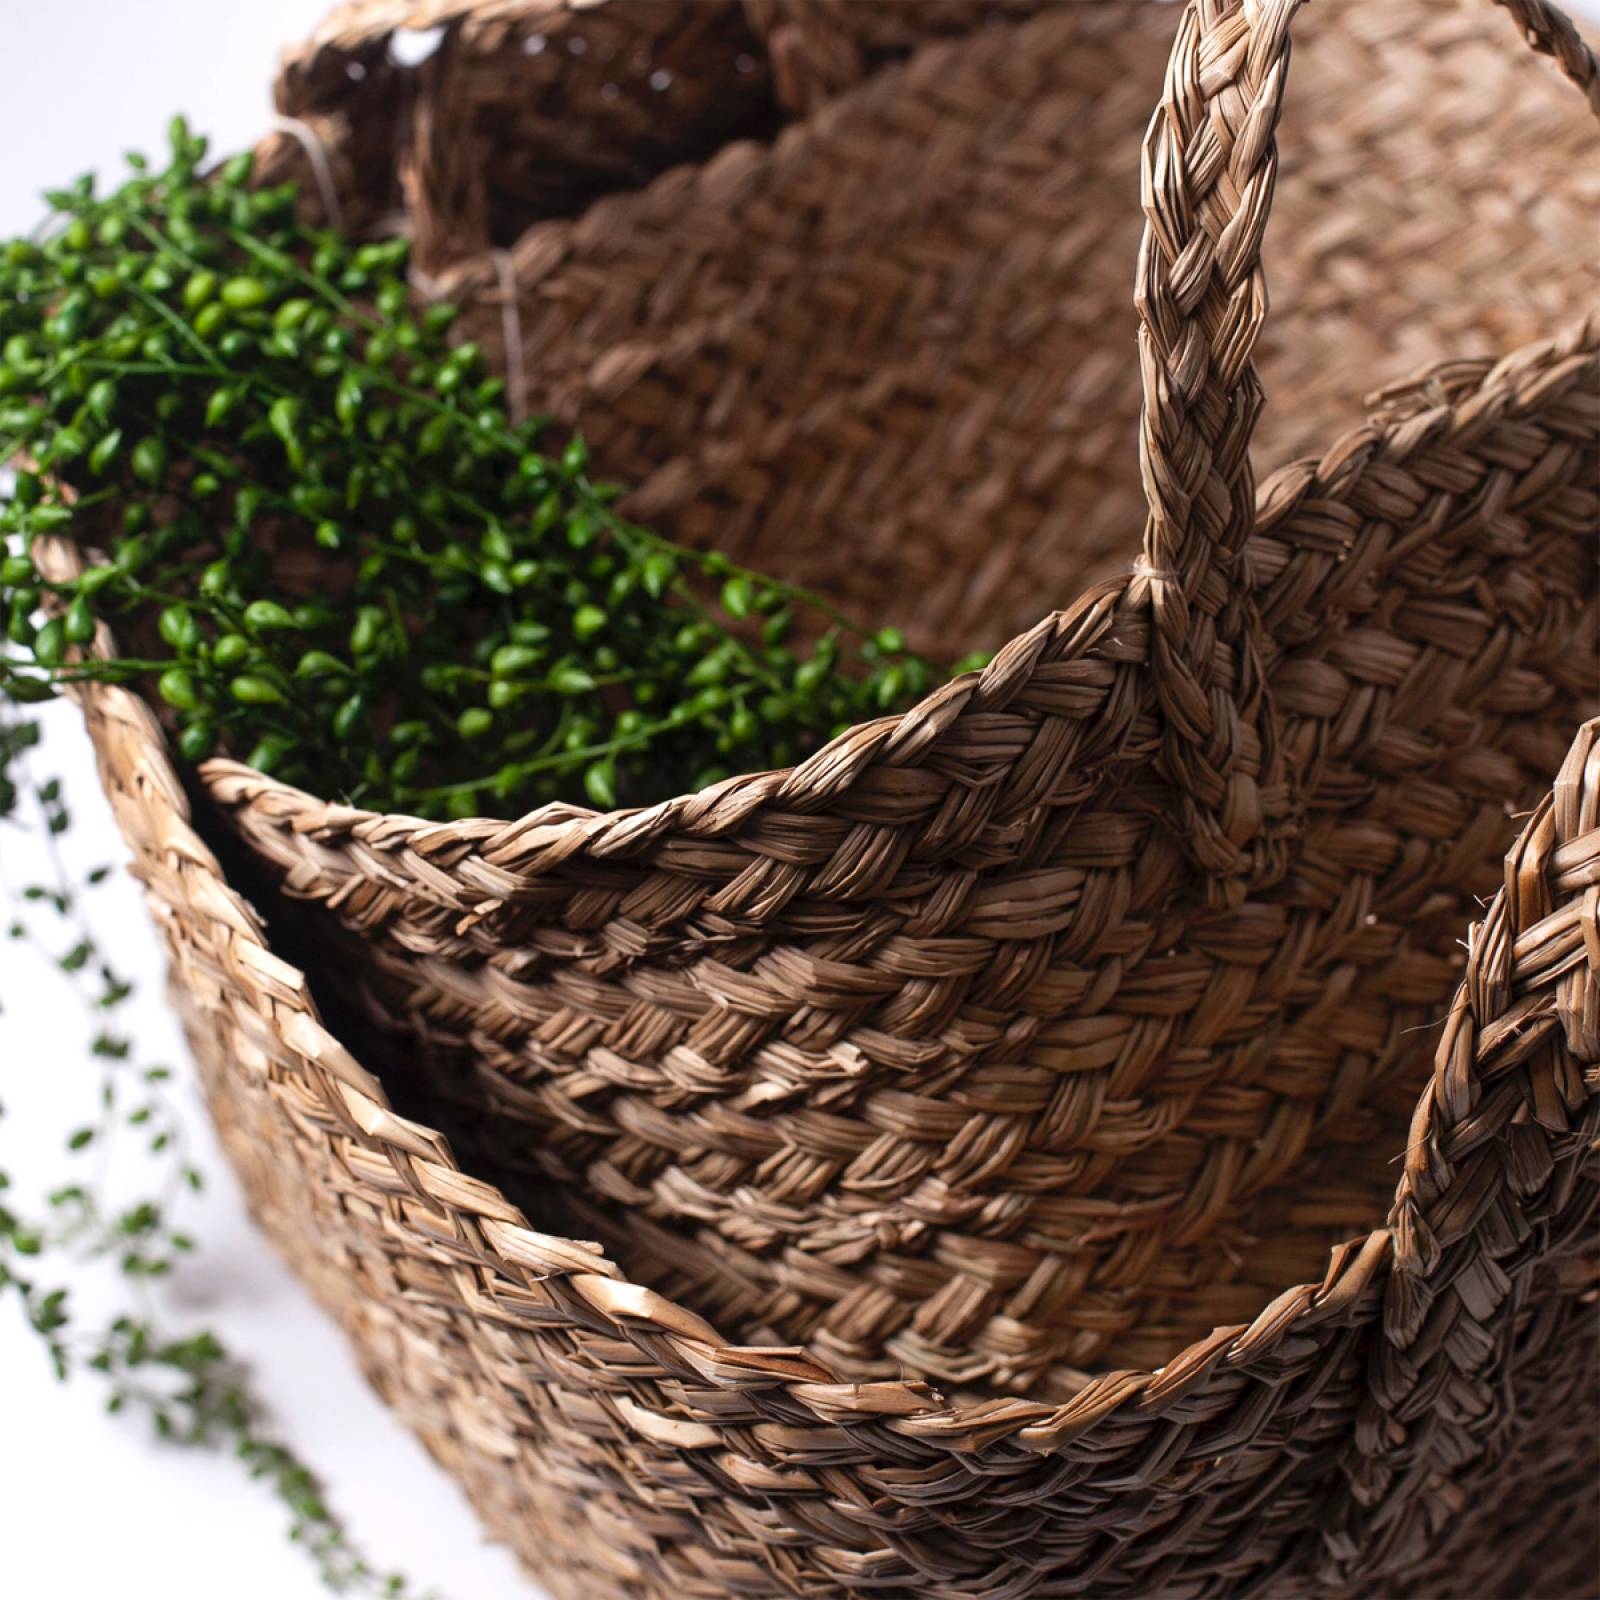 Small Square Grass Basket With Handles 30x30x25cm thumbnails